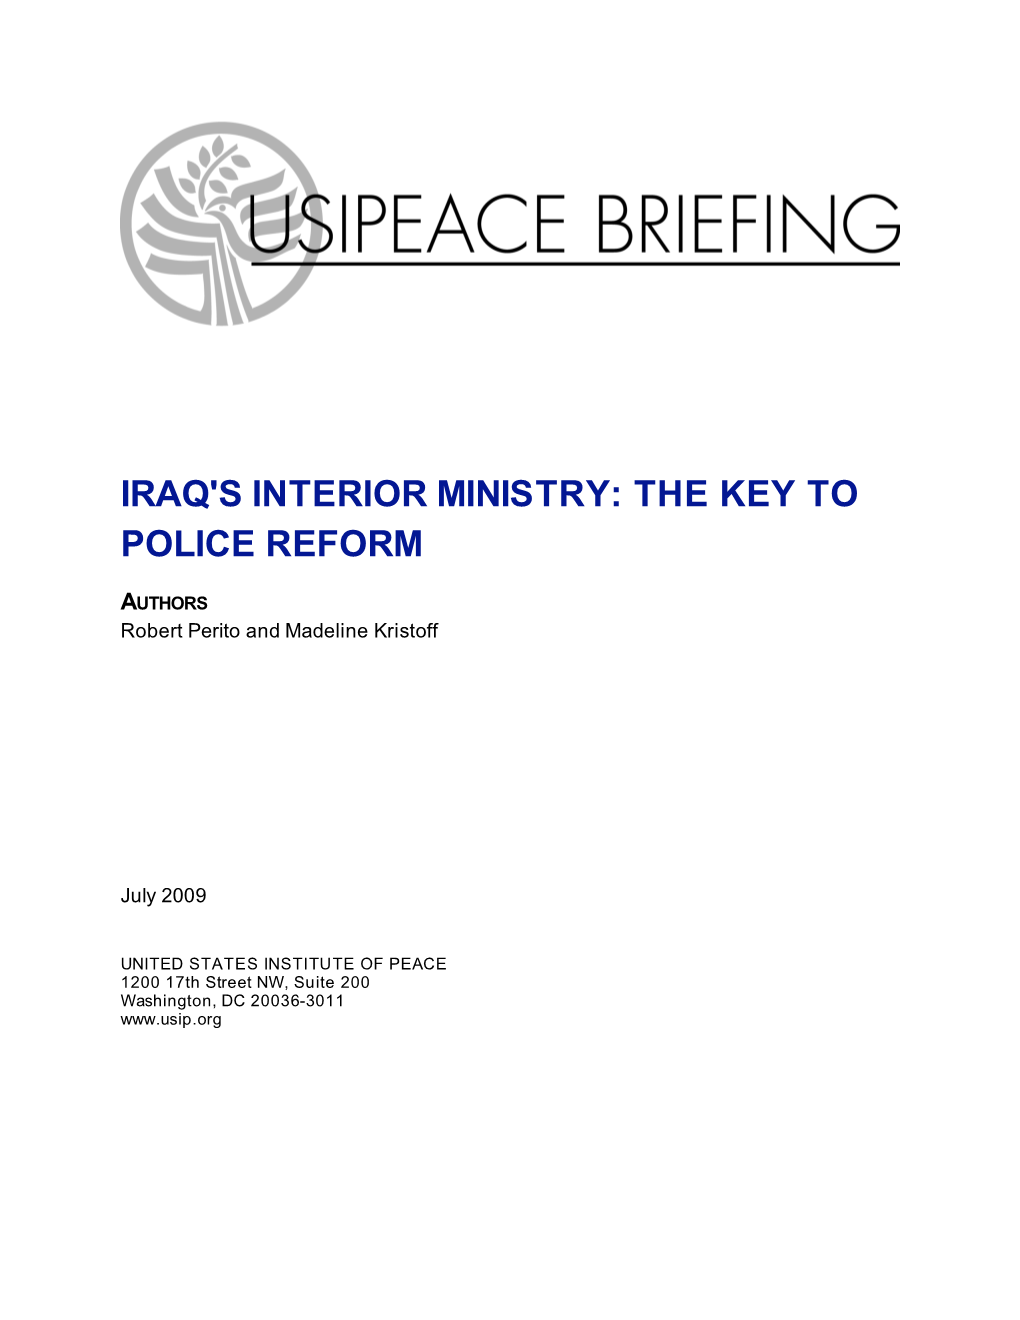 Iraq's Interior Ministry: the Key To